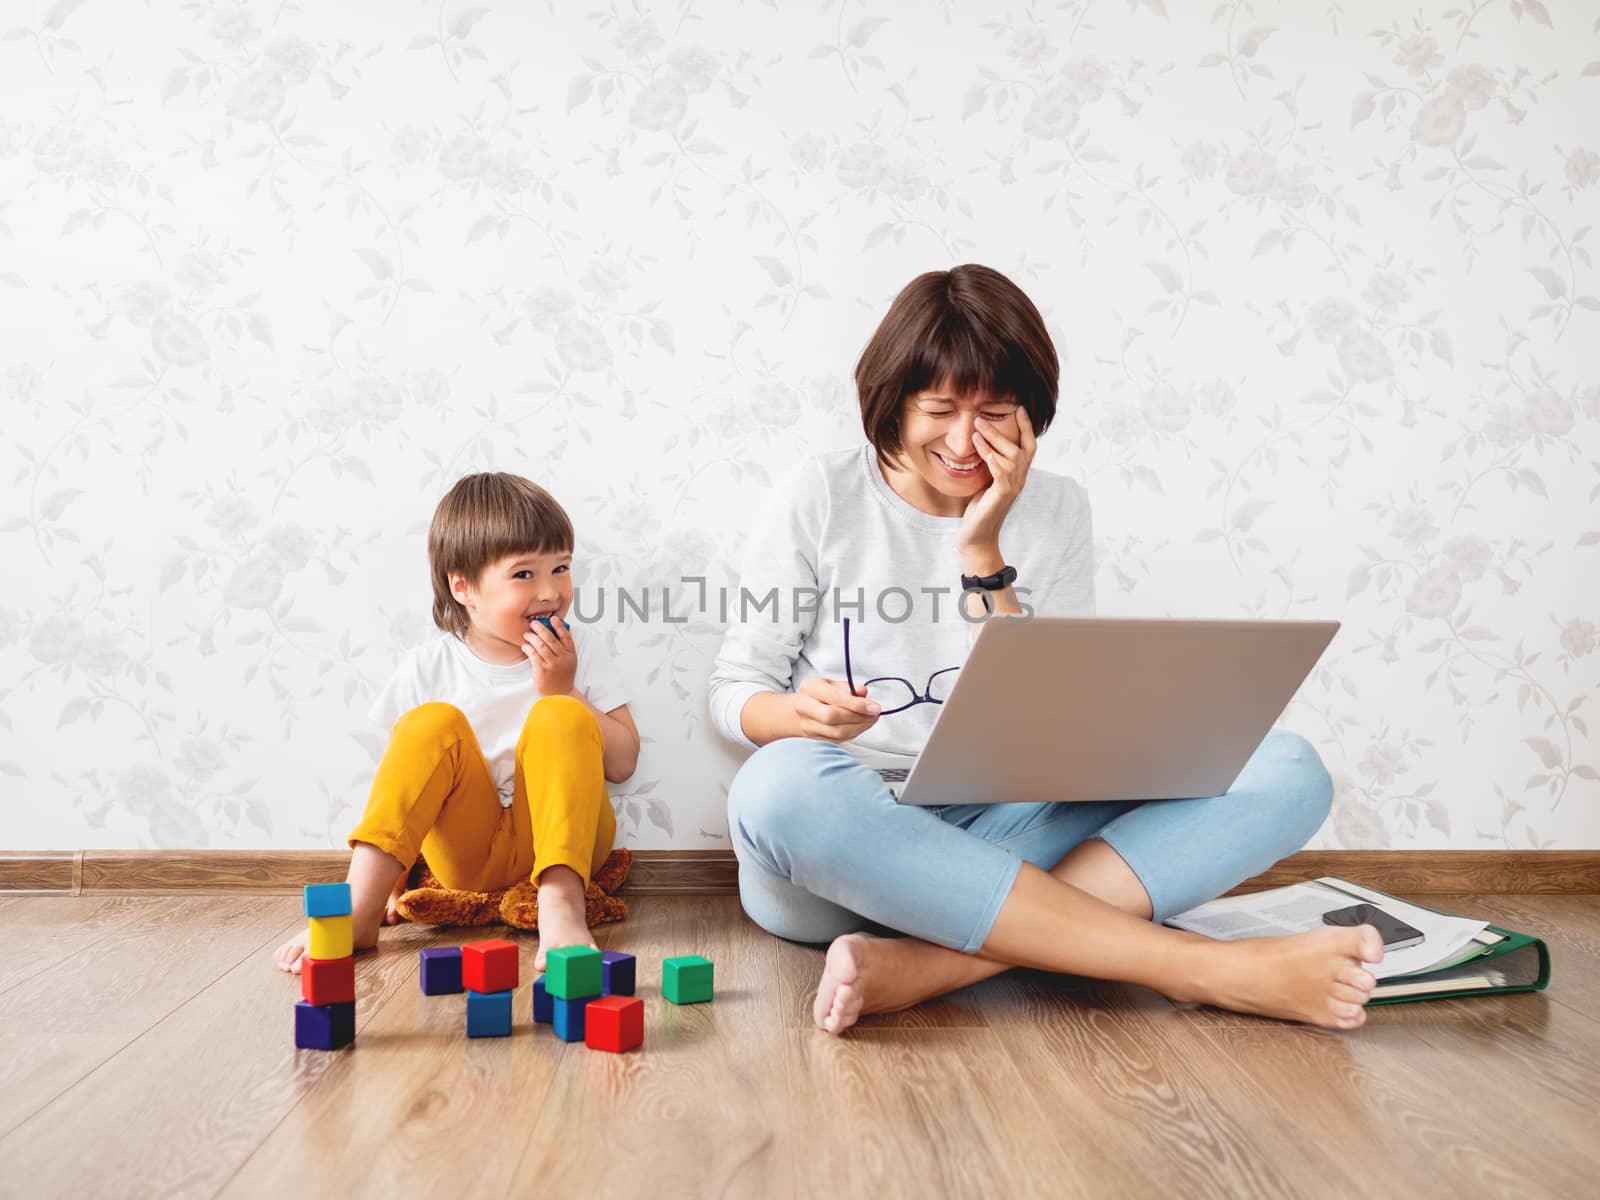 Family sits at home quarantine because of coronavirus COVID19. Mother remote works with laptop, son plays with toy blocks. Self isolation at home.